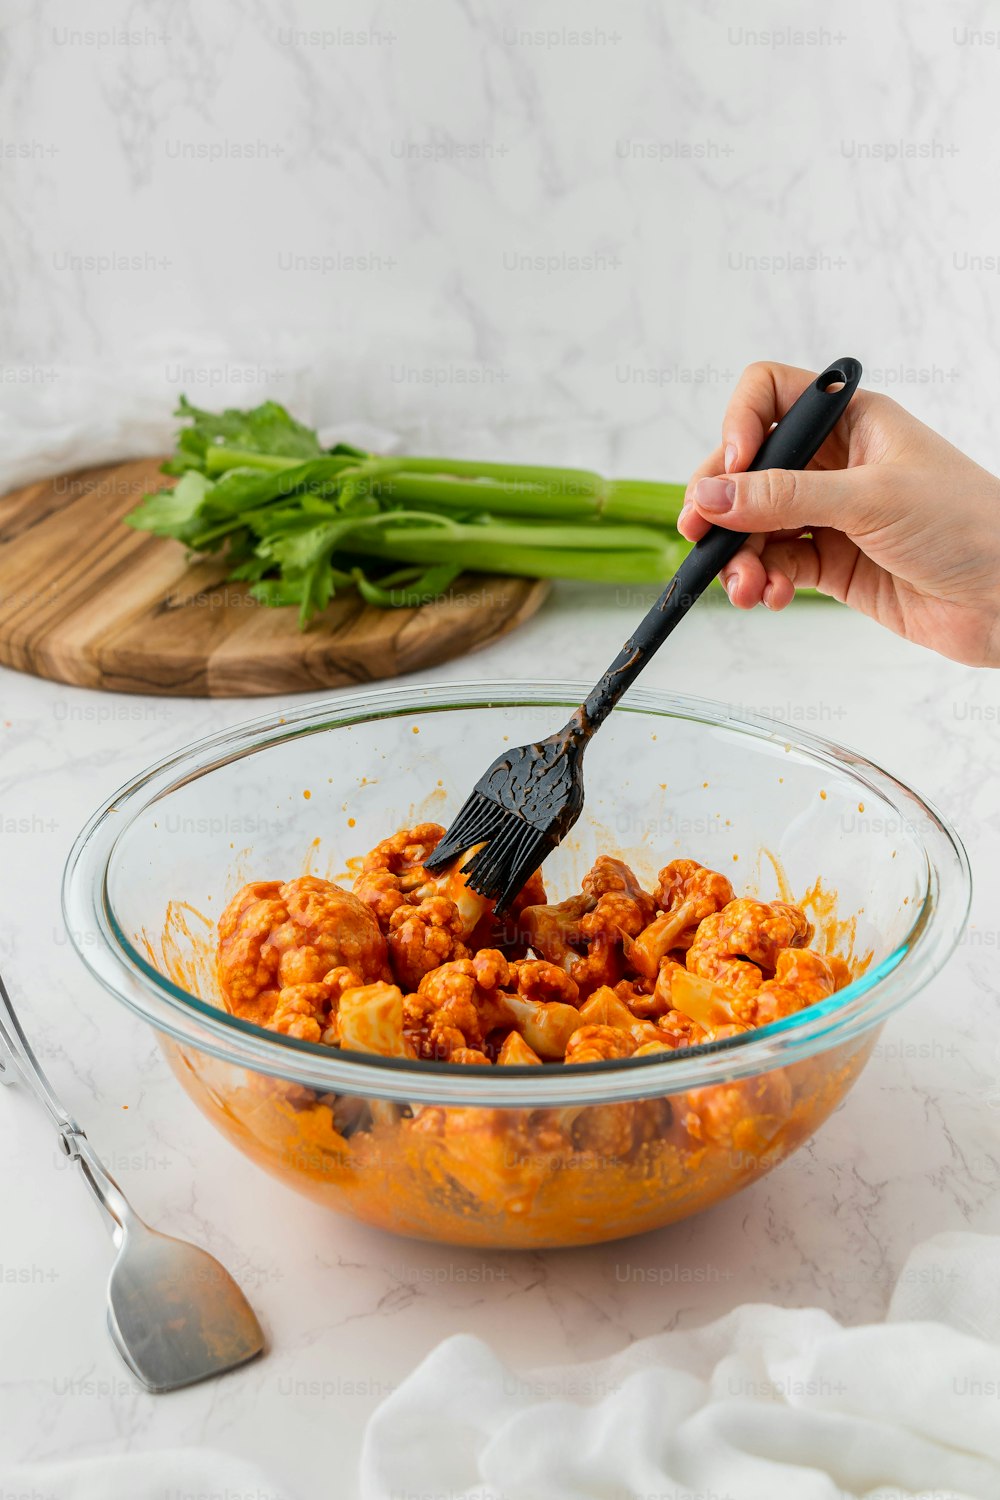 a person holding a spatula in a bowl of food